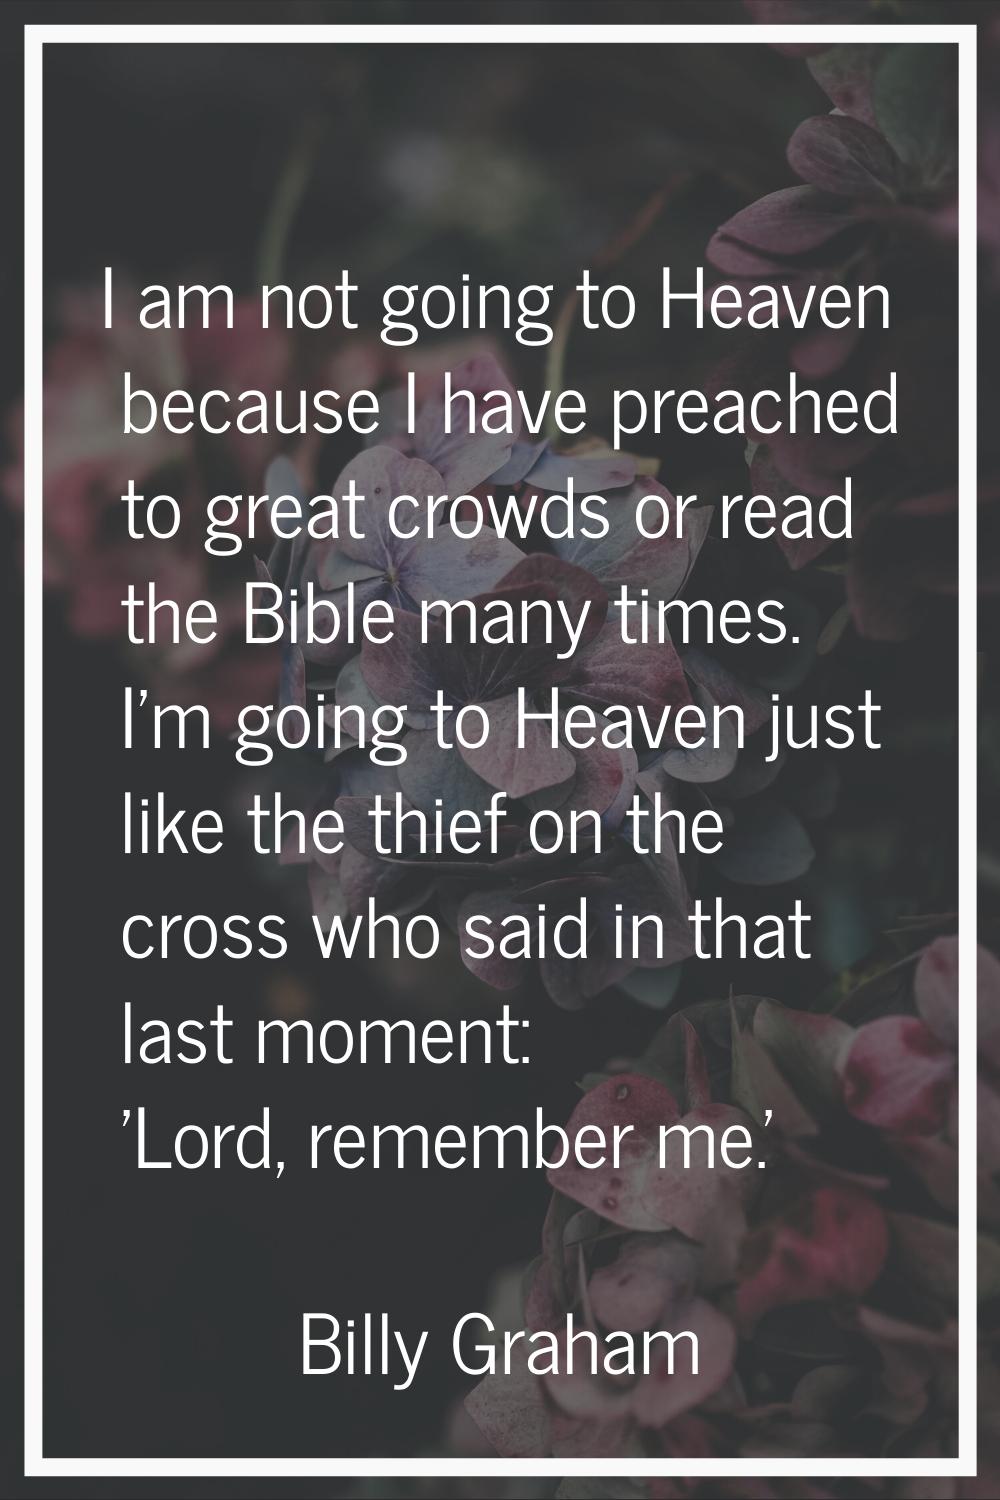 I am not going to Heaven because I have preached to great crowds or read the Bible many times. I'm 